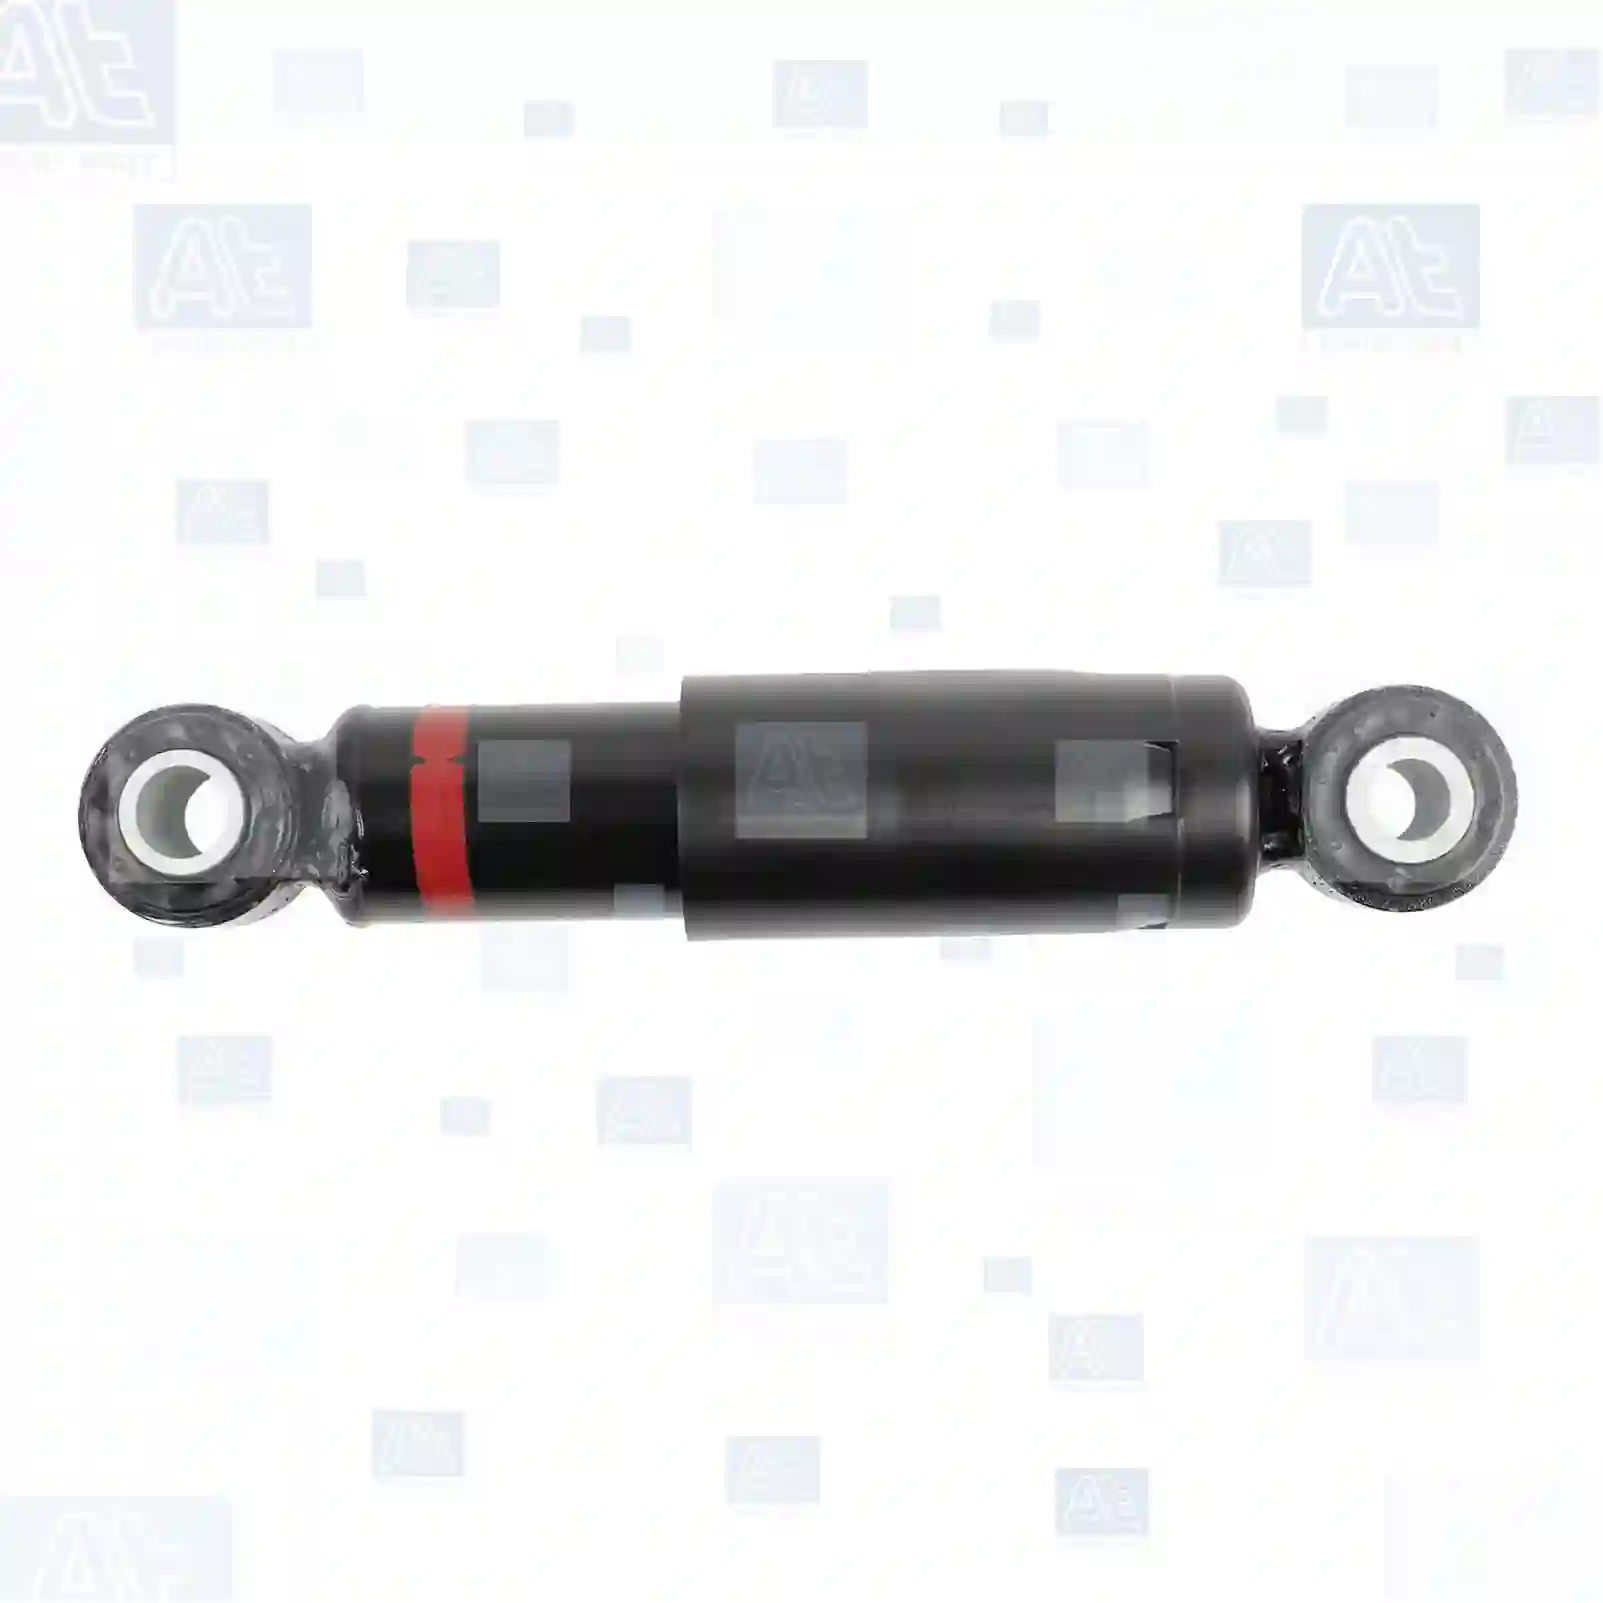 Cabin shock absorber, at no 77735606, oem no: 500348789, 98426021, 98472611, 98487778, 98487780, 99433007, 99433008, 99433009, 99454195, 99454196, 99454197, 08139025, 42555628, 42555629, 500348789, 504228086, 98426021, 98472611, 98487778, 98487780, 99431373, 99431377, 99433007, 99433008, 99433009, 99454195, 99454196, 99454197, 500348789, 98426021, 98472611, 98487778, 98487780, 99433007, 99433008, 99433009, 99454195, 99454196, 99454197 At Spare Part | Engine, Accelerator Pedal, Camshaft, Connecting Rod, Crankcase, Crankshaft, Cylinder Head, Engine Suspension Mountings, Exhaust Manifold, Exhaust Gas Recirculation, Filter Kits, Flywheel Housing, General Overhaul Kits, Engine, Intake Manifold, Oil Cleaner, Oil Cooler, Oil Filter, Oil Pump, Oil Sump, Piston & Liner, Sensor & Switch, Timing Case, Turbocharger, Cooling System, Belt Tensioner, Coolant Filter, Coolant Pipe, Corrosion Prevention Agent, Drive, Expansion Tank, Fan, Intercooler, Monitors & Gauges, Radiator, Thermostat, V-Belt / Timing belt, Water Pump, Fuel System, Electronical Injector Unit, Feed Pump, Fuel Filter, cpl., Fuel Gauge Sender,  Fuel Line, Fuel Pump, Fuel Tank, Injection Line Kit, Injection Pump, Exhaust System, Clutch & Pedal, Gearbox, Propeller Shaft, Axles, Brake System, Hubs & Wheels, Suspension, Leaf Spring, Universal Parts / Accessories, Steering, Electrical System, Cabin Cabin shock absorber, at no 77735606, oem no: 500348789, 98426021, 98472611, 98487778, 98487780, 99433007, 99433008, 99433009, 99454195, 99454196, 99454197, 08139025, 42555628, 42555629, 500348789, 504228086, 98426021, 98472611, 98487778, 98487780, 99431373, 99431377, 99433007, 99433008, 99433009, 99454195, 99454196, 99454197, 500348789, 98426021, 98472611, 98487778, 98487780, 99433007, 99433008, 99433009, 99454195, 99454196, 99454197 At Spare Part | Engine, Accelerator Pedal, Camshaft, Connecting Rod, Crankcase, Crankshaft, Cylinder Head, Engine Suspension Mountings, Exhaust Manifold, Exhaust Gas Recirculation, Filter Kits, Flywheel Housing, General Overhaul Kits, Engine, Intake Manifold, Oil Cleaner, Oil Cooler, Oil Filter, Oil Pump, Oil Sump, Piston & Liner, Sensor & Switch, Timing Case, Turbocharger, Cooling System, Belt Tensioner, Coolant Filter, Coolant Pipe, Corrosion Prevention Agent, Drive, Expansion Tank, Fan, Intercooler, Monitors & Gauges, Radiator, Thermostat, V-Belt / Timing belt, Water Pump, Fuel System, Electronical Injector Unit, Feed Pump, Fuel Filter, cpl., Fuel Gauge Sender,  Fuel Line, Fuel Pump, Fuel Tank, Injection Line Kit, Injection Pump, Exhaust System, Clutch & Pedal, Gearbox, Propeller Shaft, Axles, Brake System, Hubs & Wheels, Suspension, Leaf Spring, Universal Parts / Accessories, Steering, Electrical System, Cabin